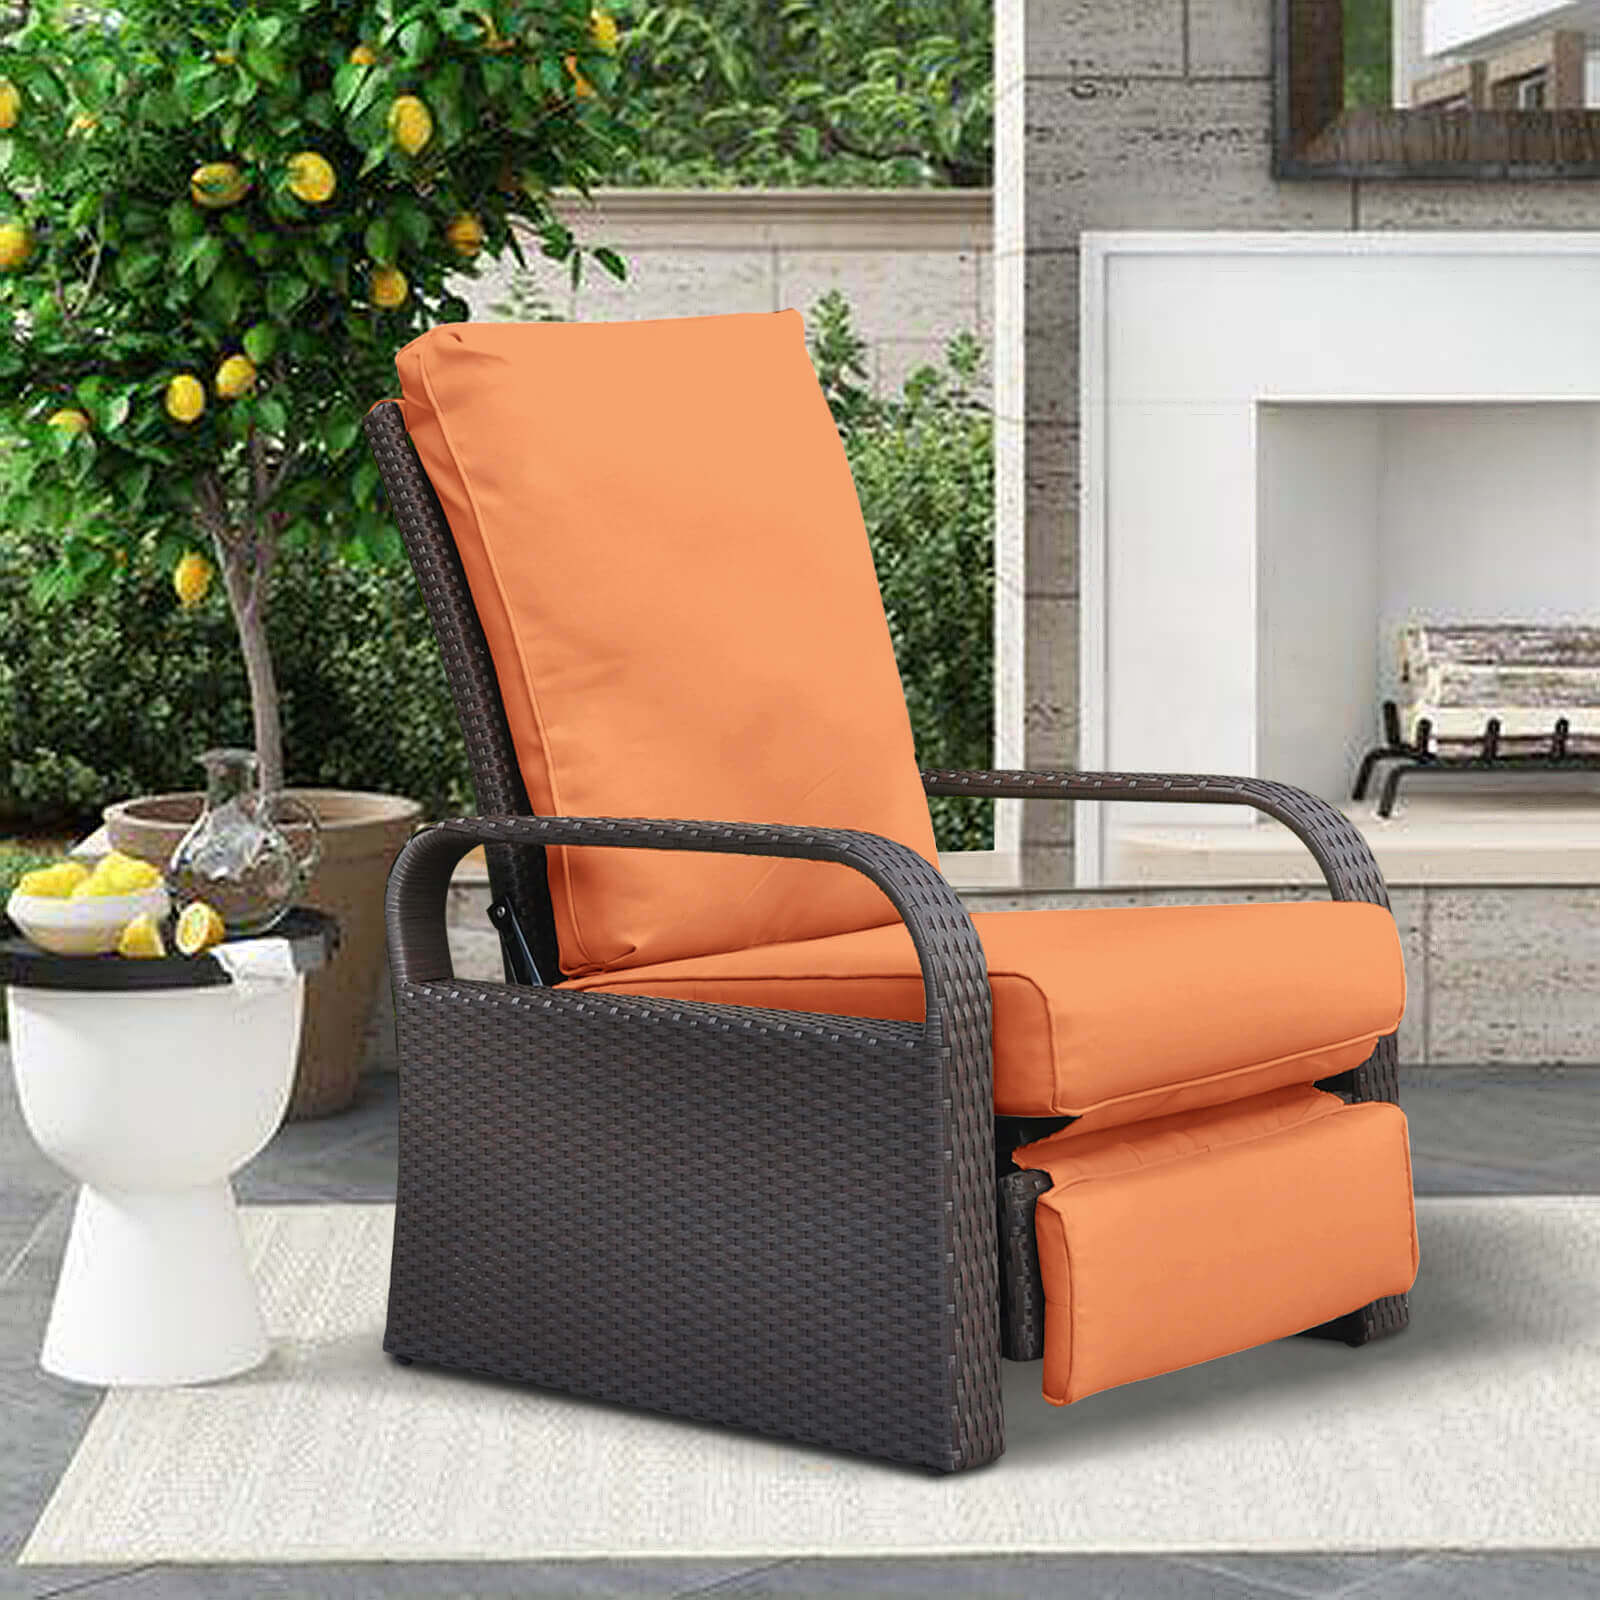 Arttoreal Outdoor Wicker Recliner / Rattan Sofa Recliner / Aluminum Frame Recliner Chair / Patio Furniture Single Armchair with Cushion